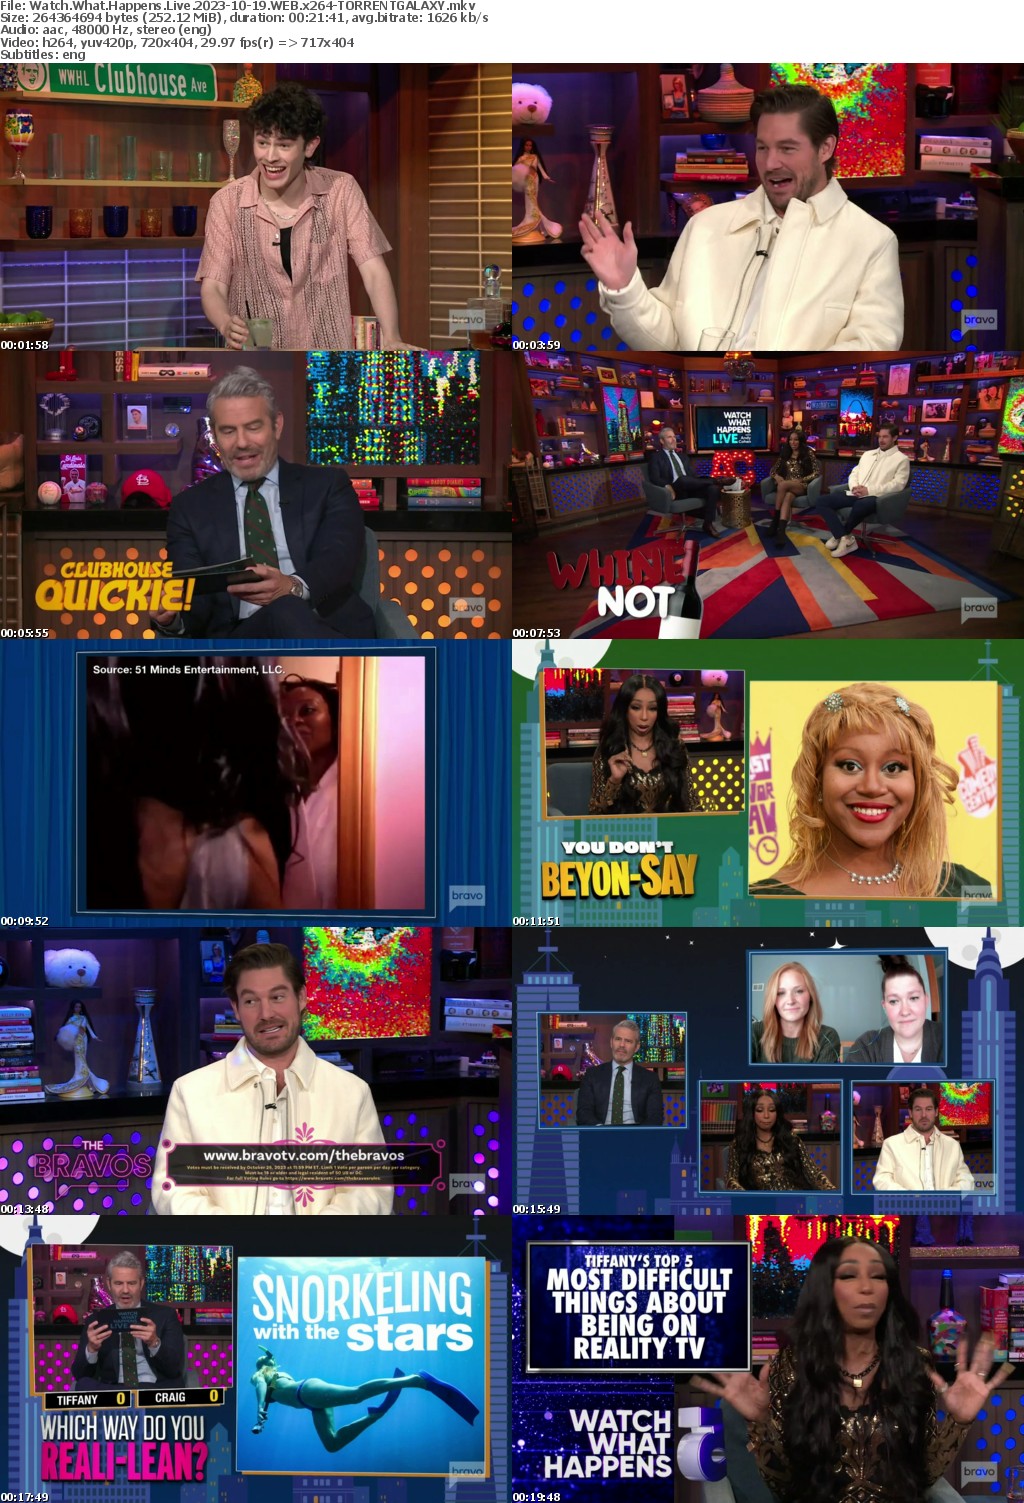 Watch What Happens Live 2023-10-19 WEB x264-GALAXY